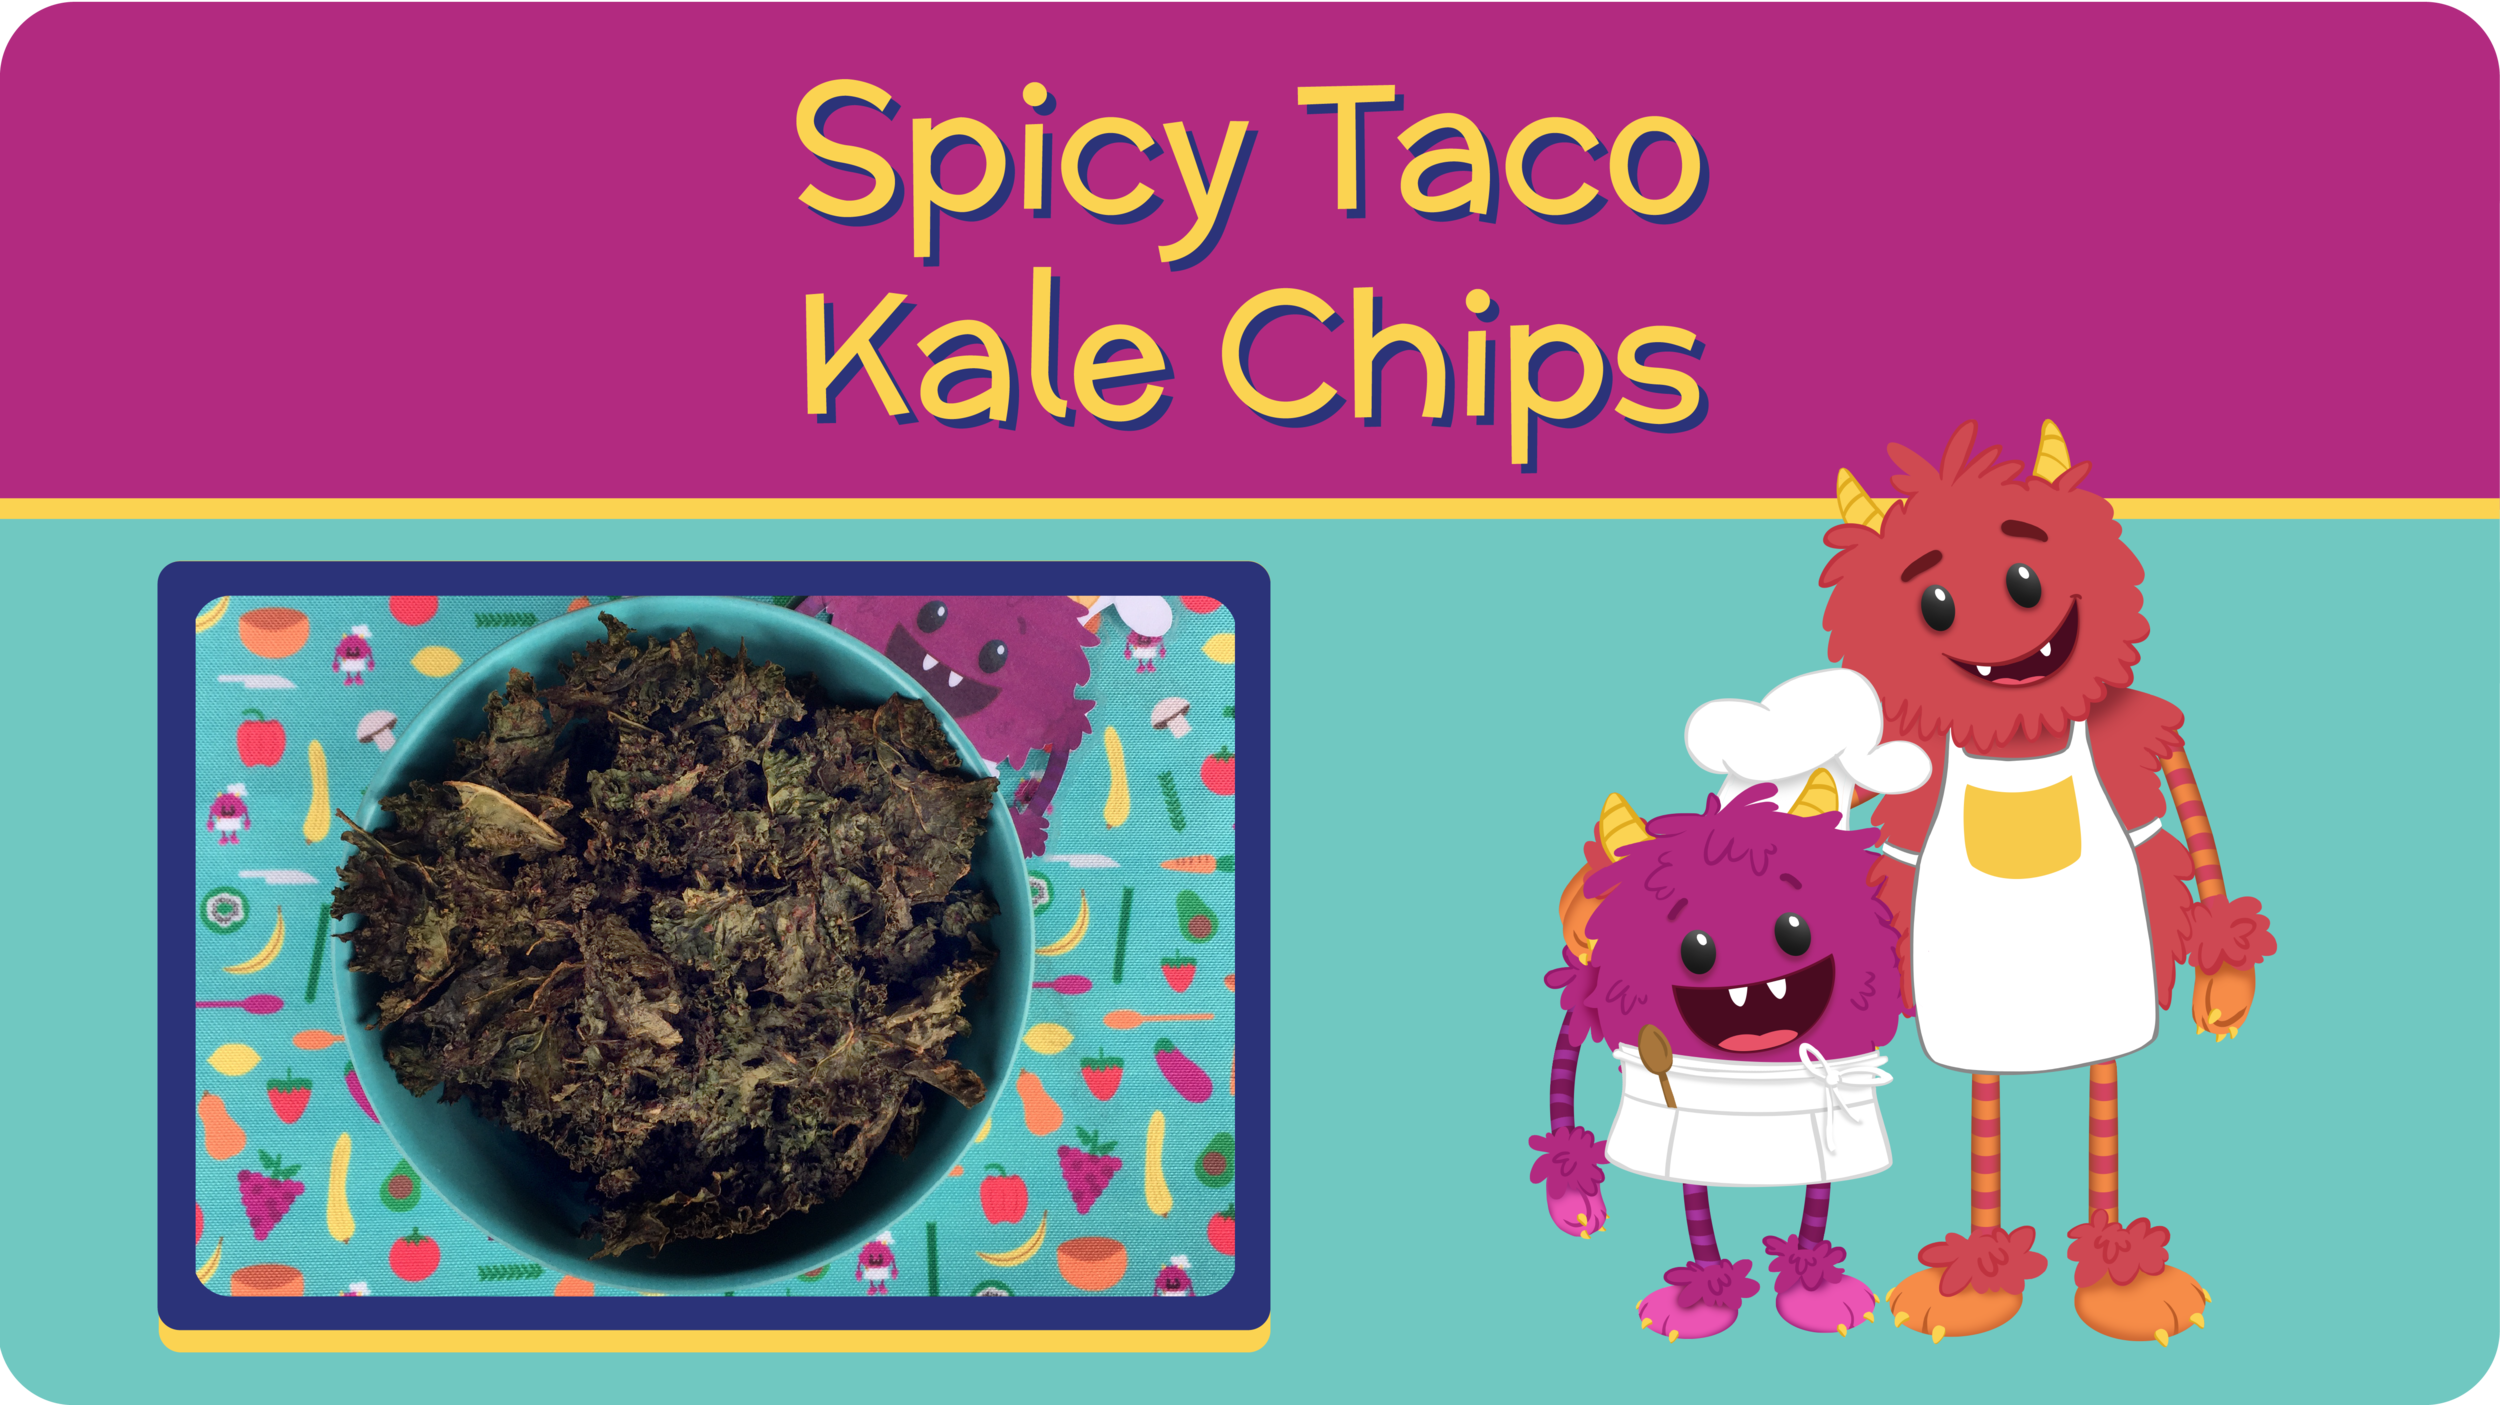 01_SpicyTacoKaleChips_Title-01.png